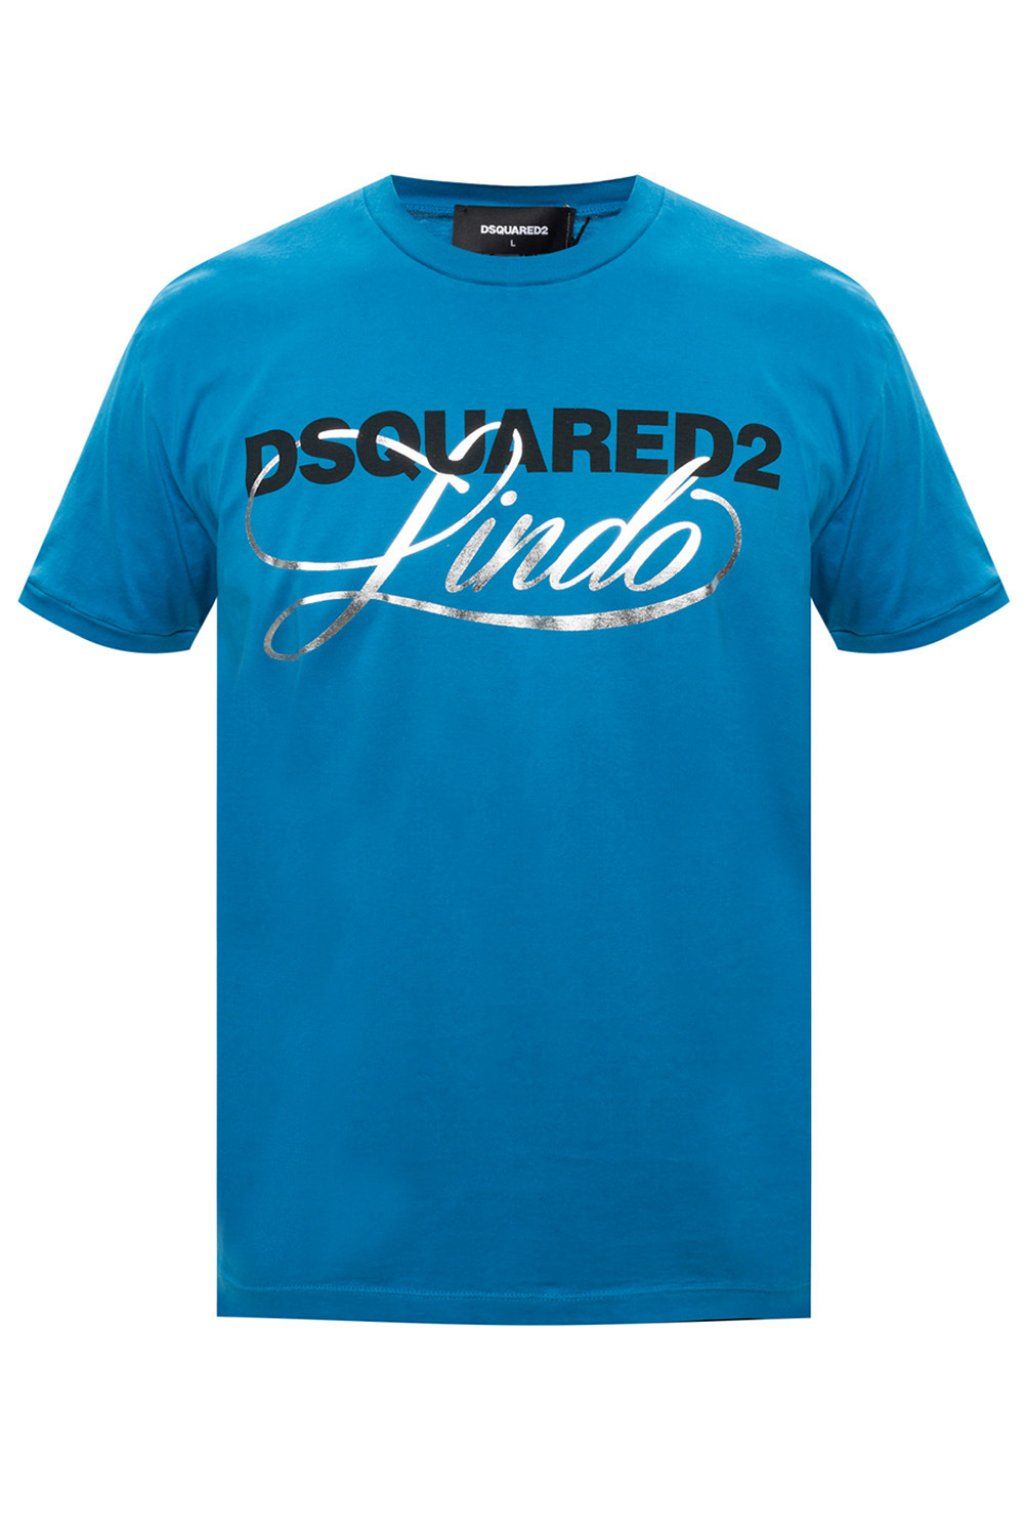 Chic Blue Logo Tee with Silver Accents